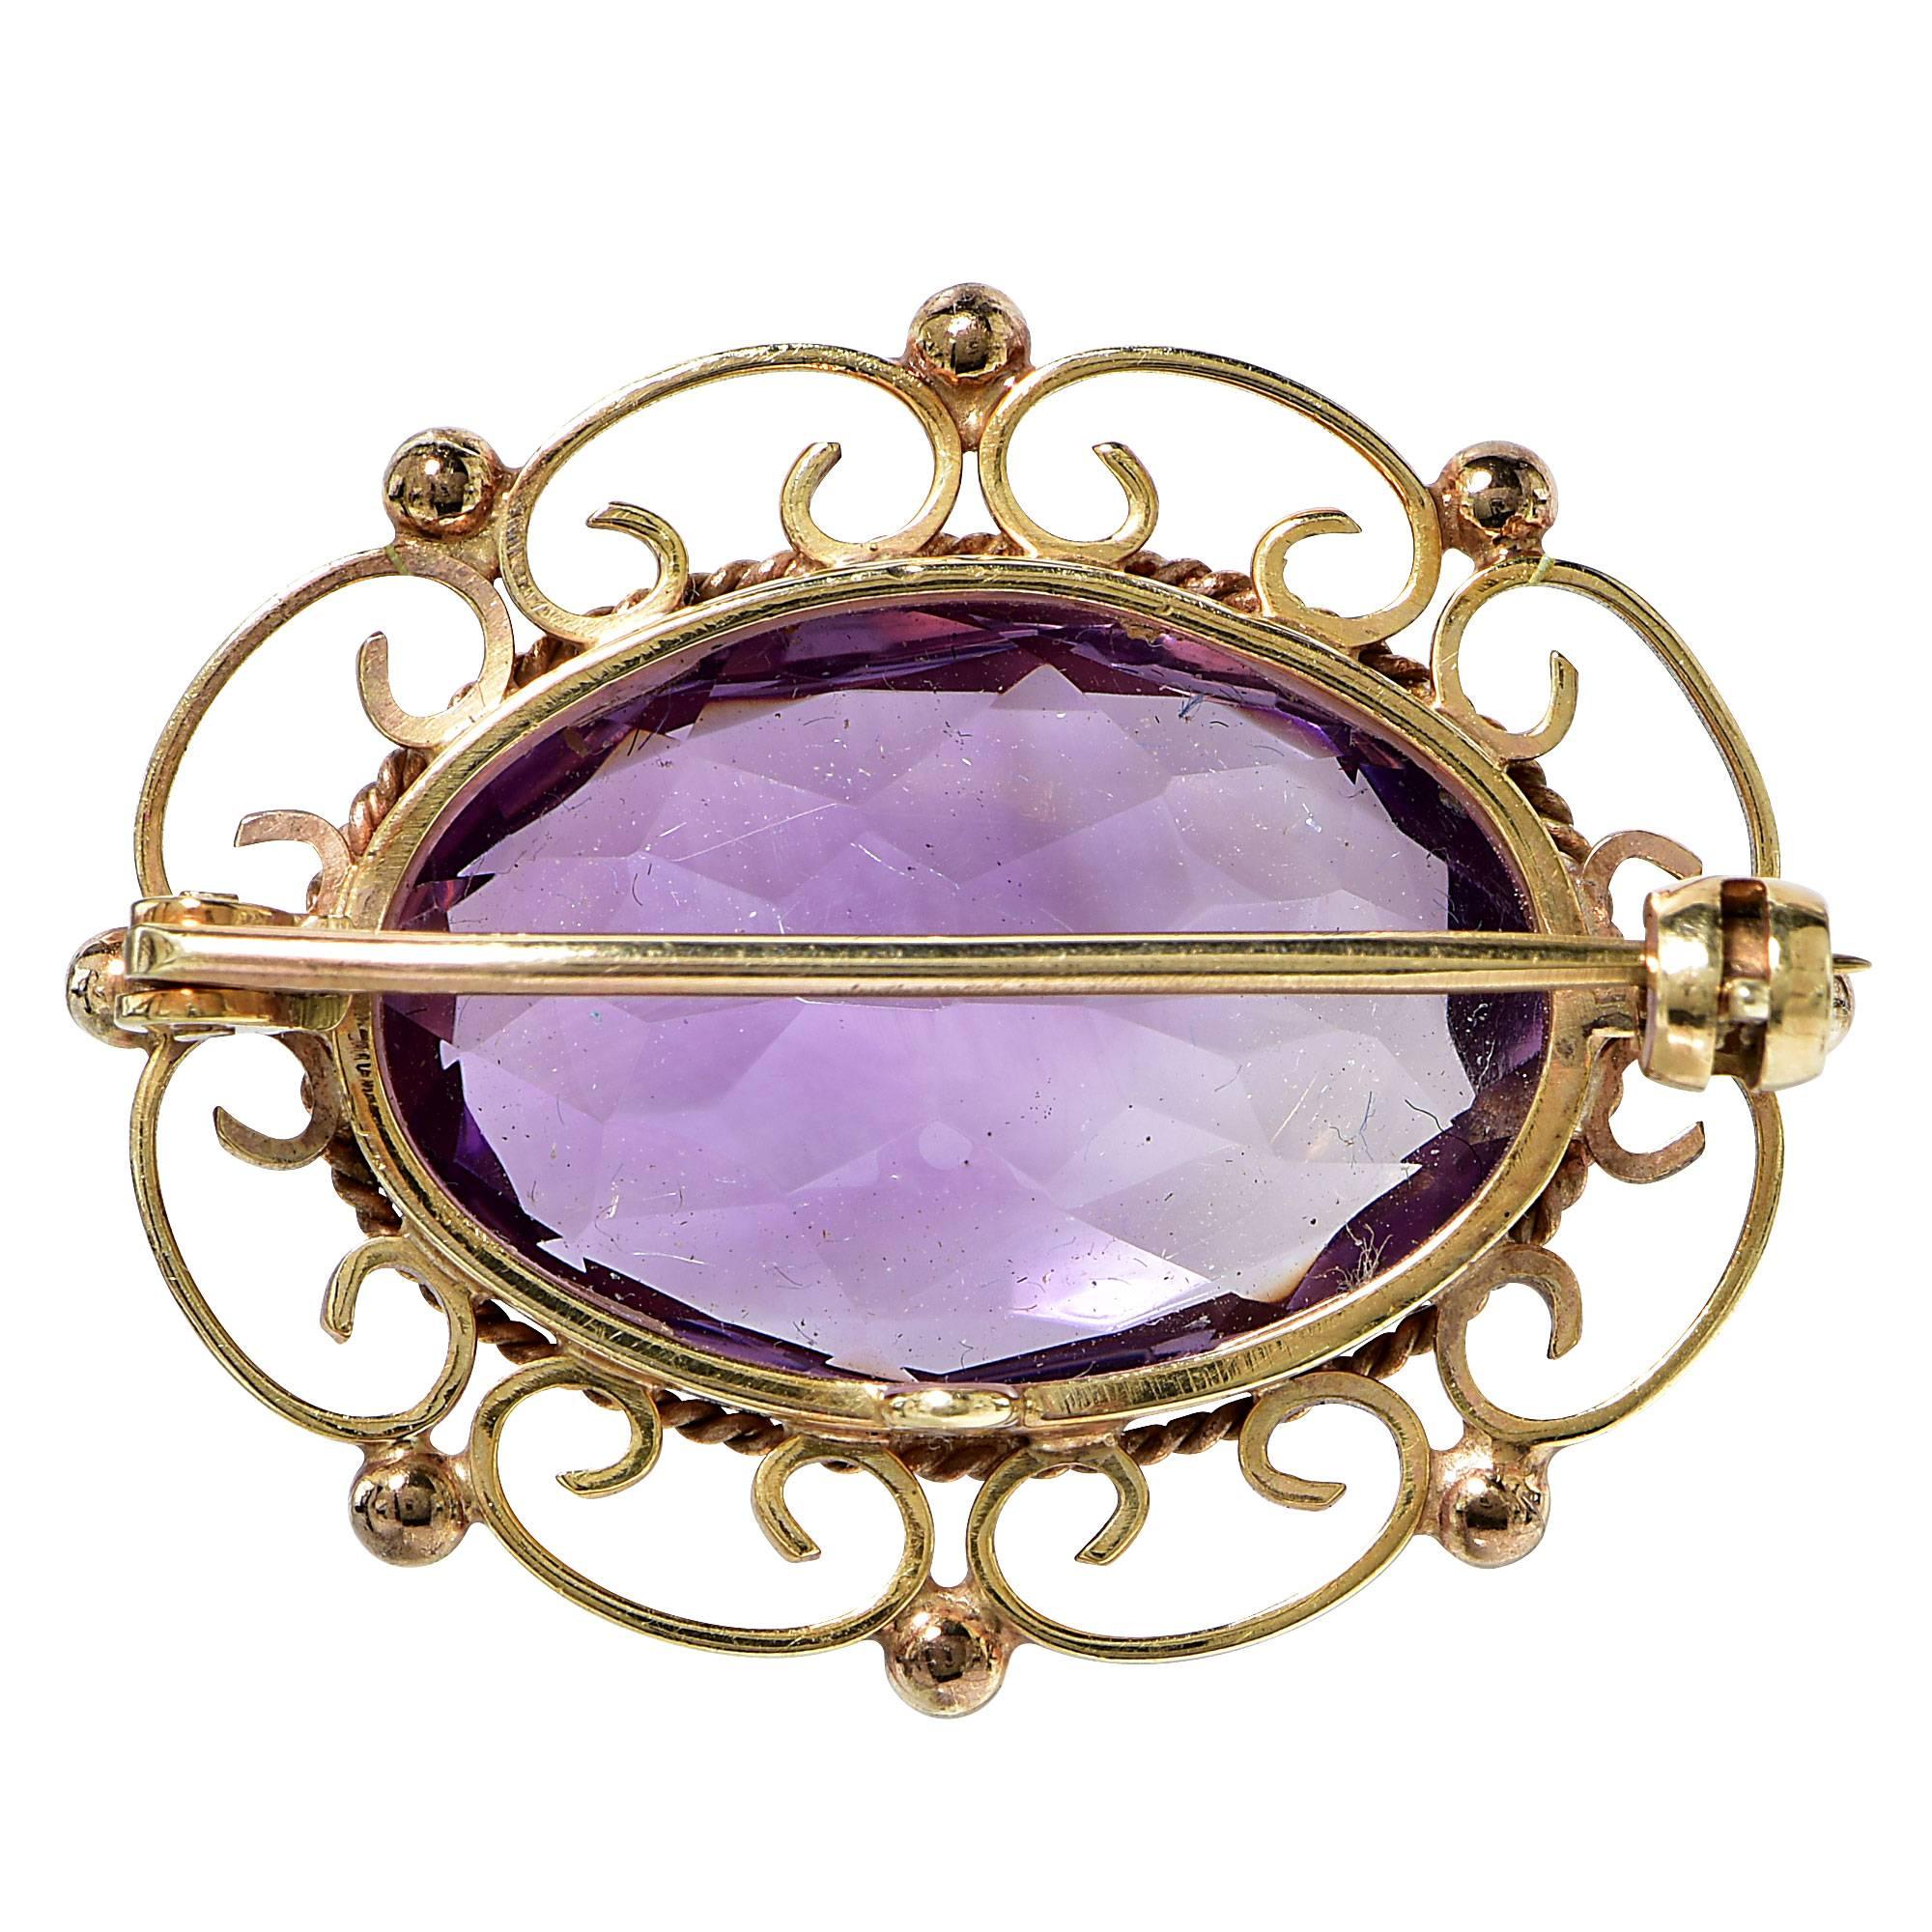 9k vintage brooch featuring an oval cut amethyst weighing approximately 20cts.

Metal weight: 8.39 grams

This brooch is accompanied by a retail appraisal performed by a Graduate Gemologist.